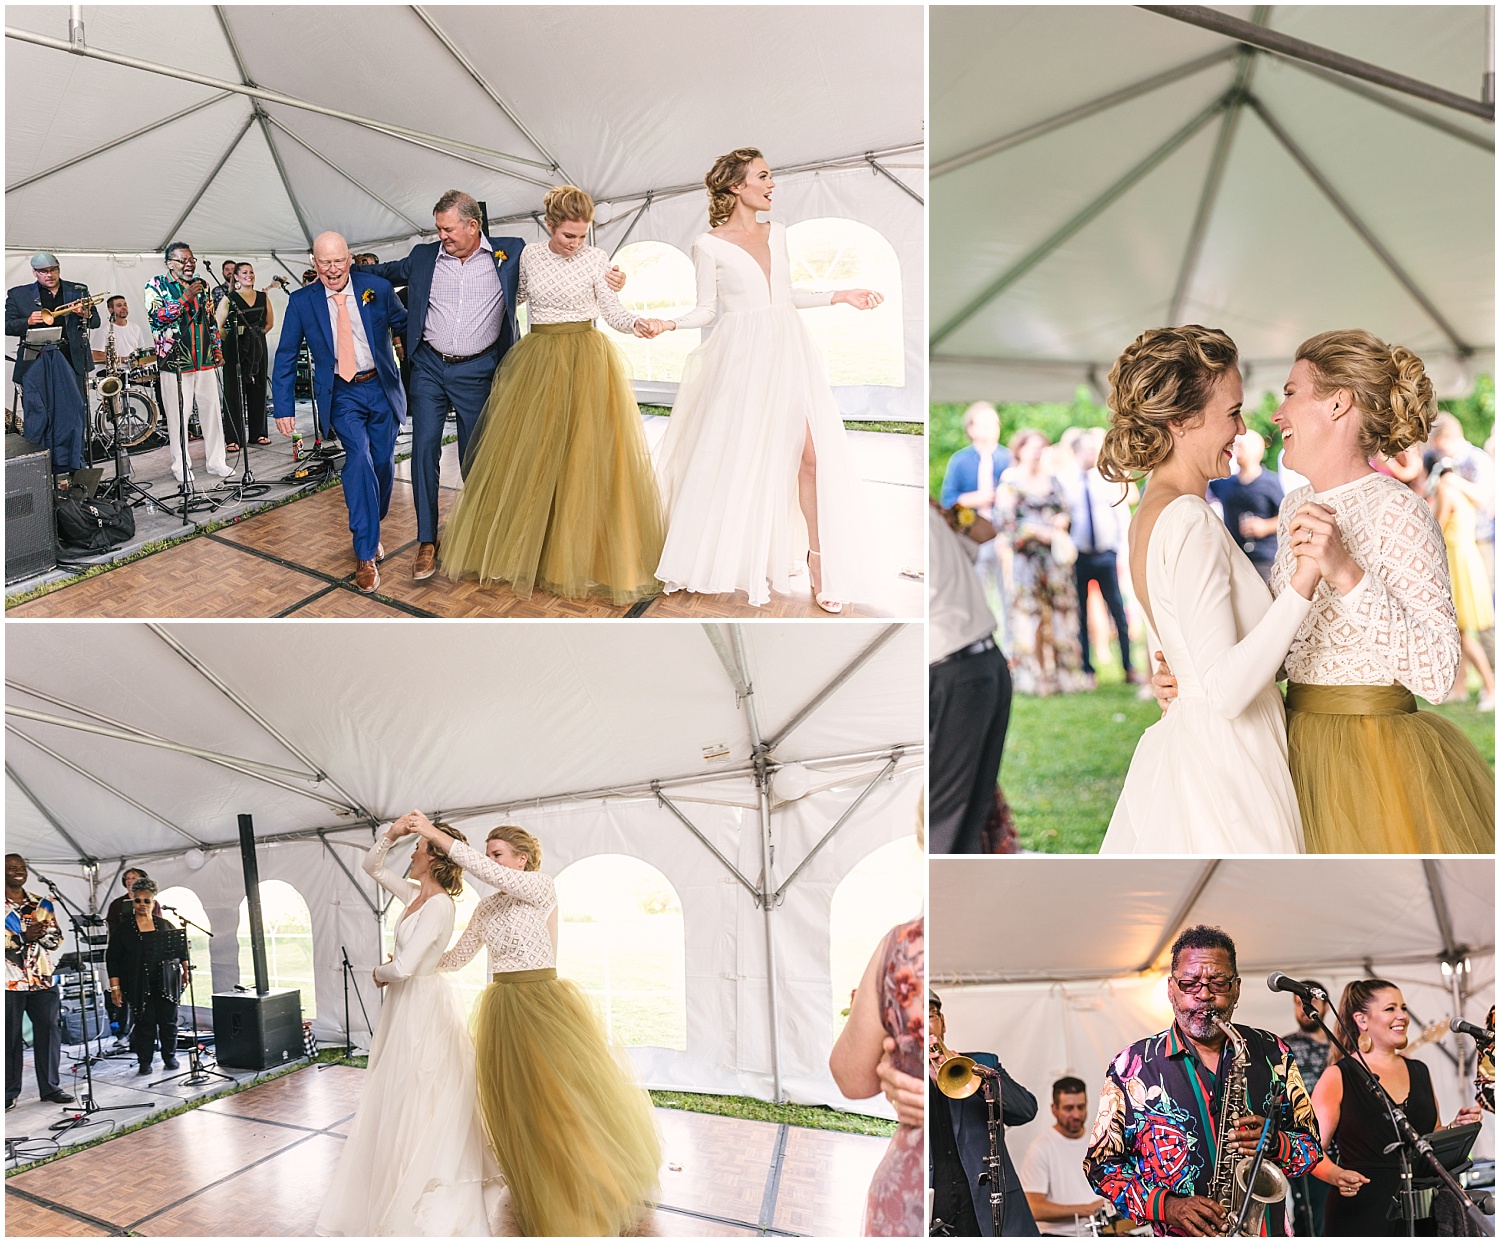 Brides dancing at their Pastures of Plenty wedding reception with the band Tunisia playing